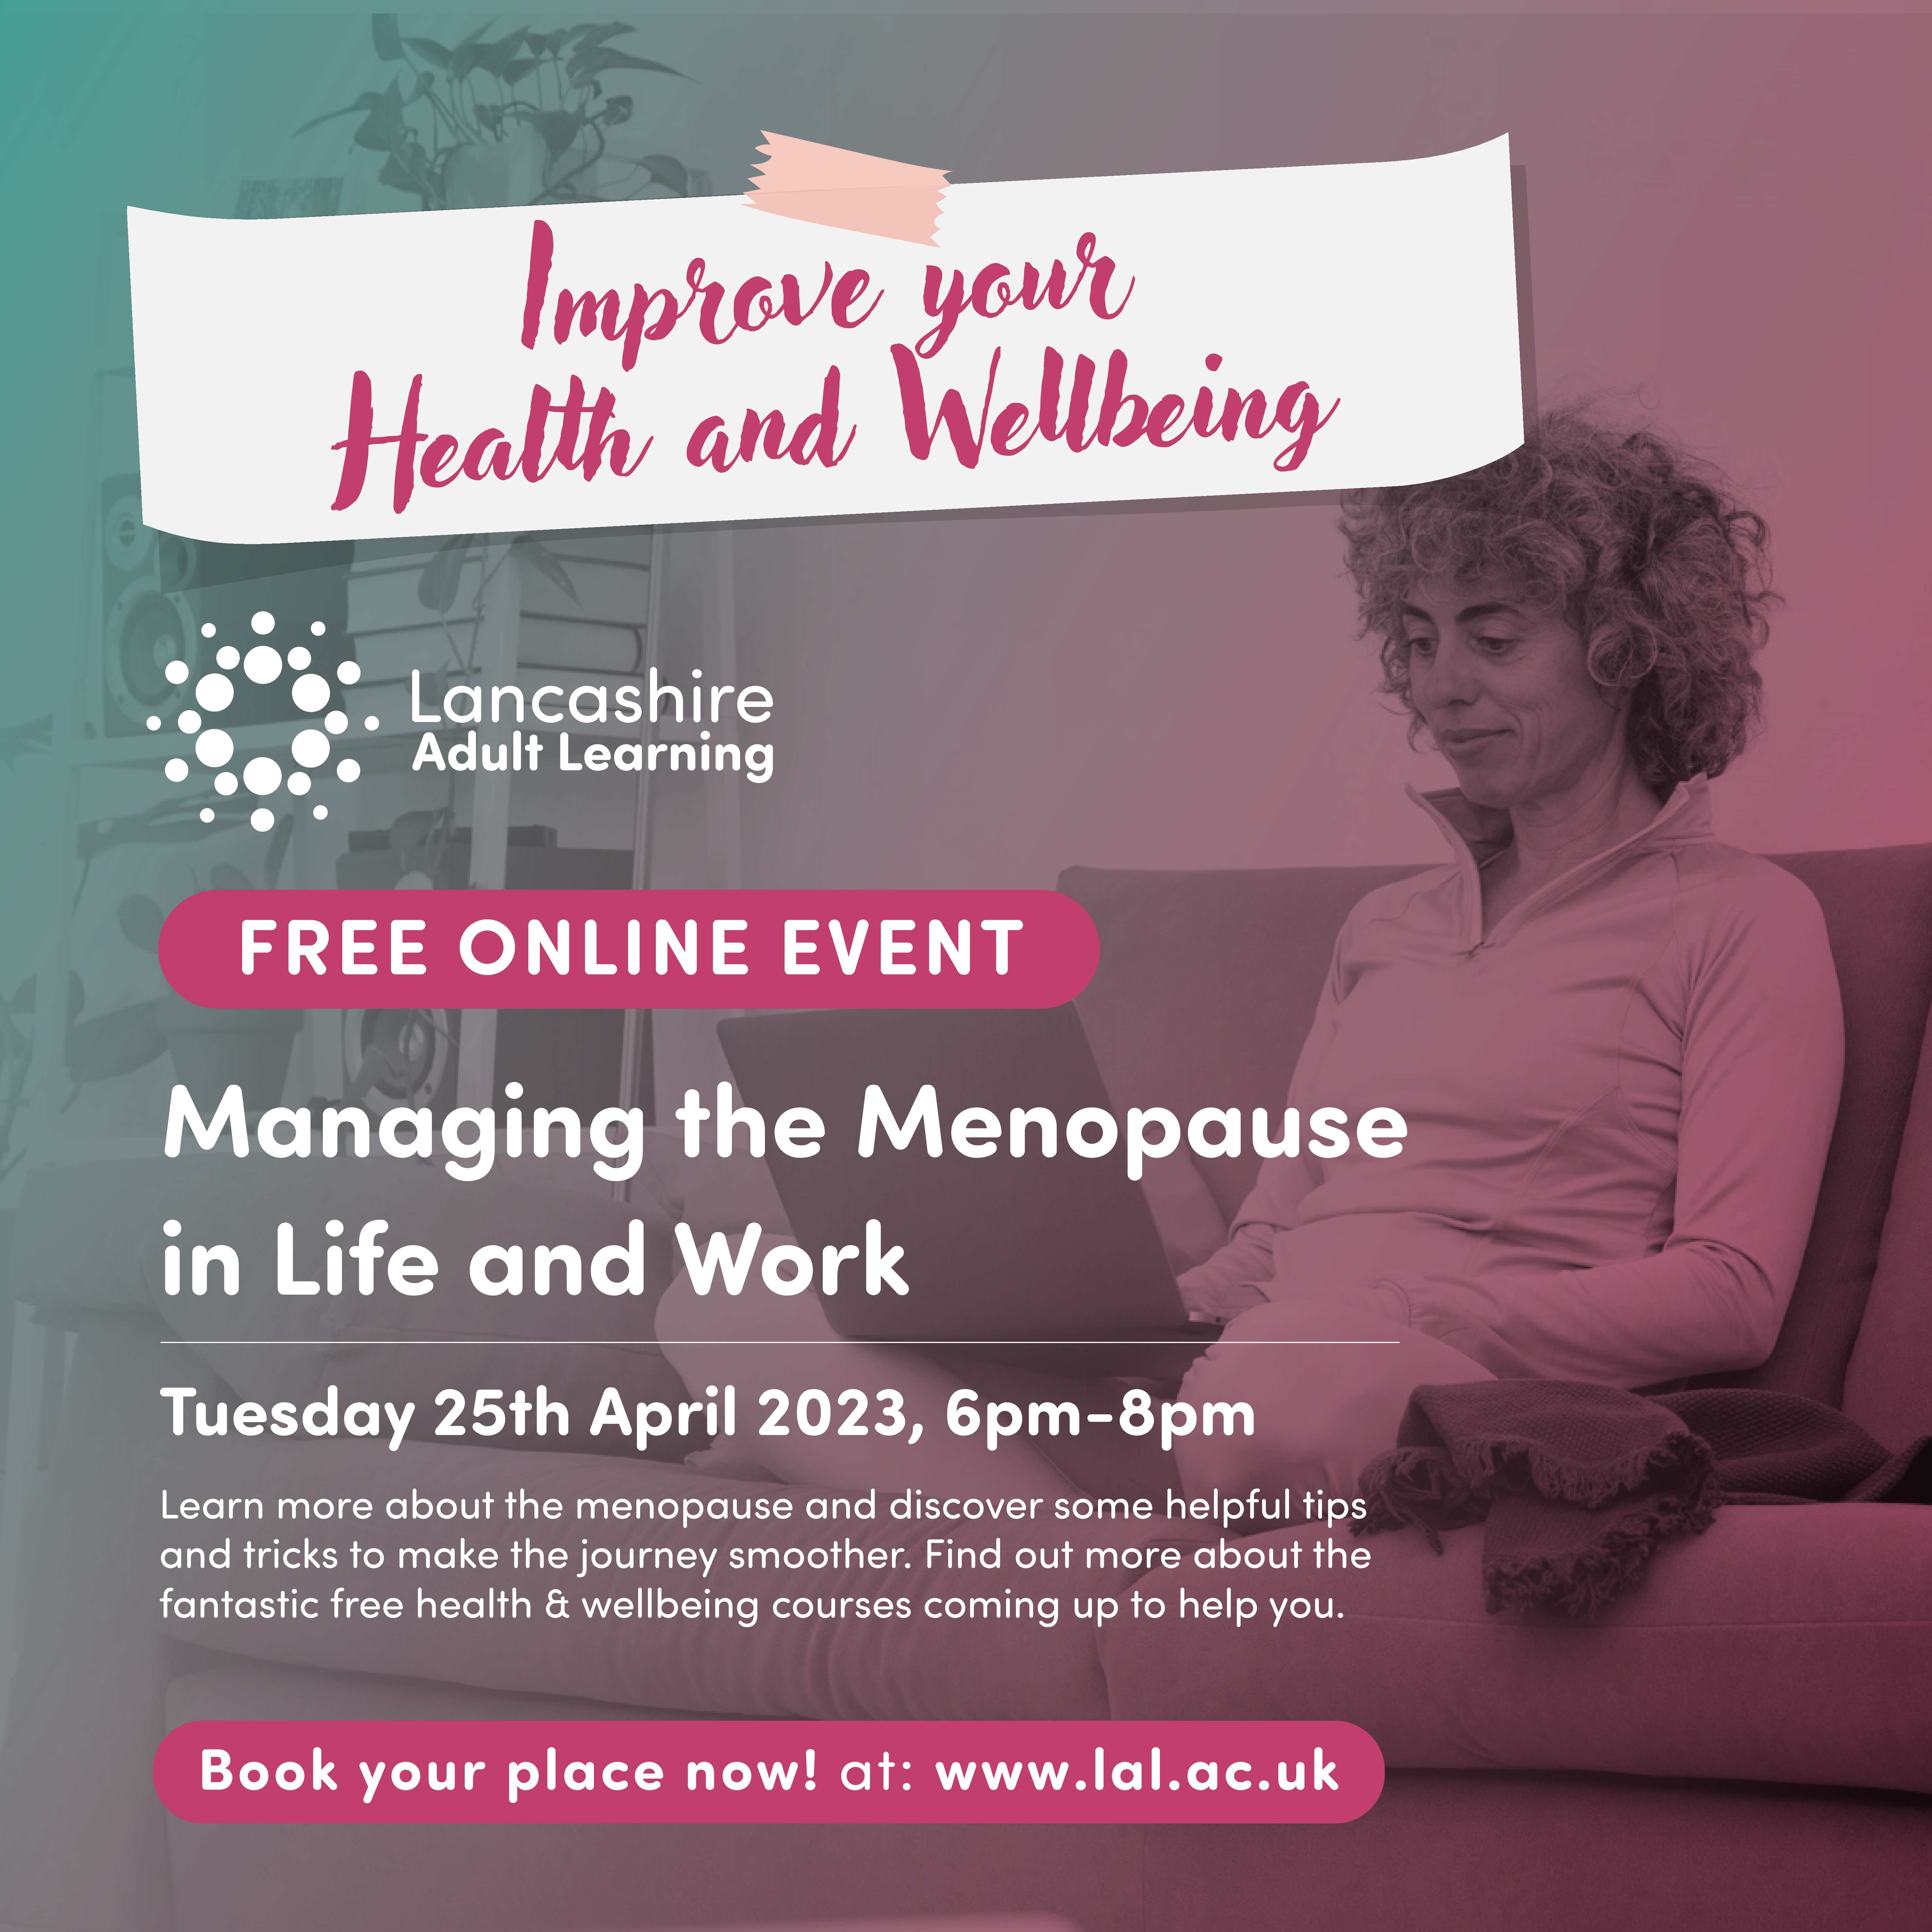 Free online event  Managing the Menopause in life and work